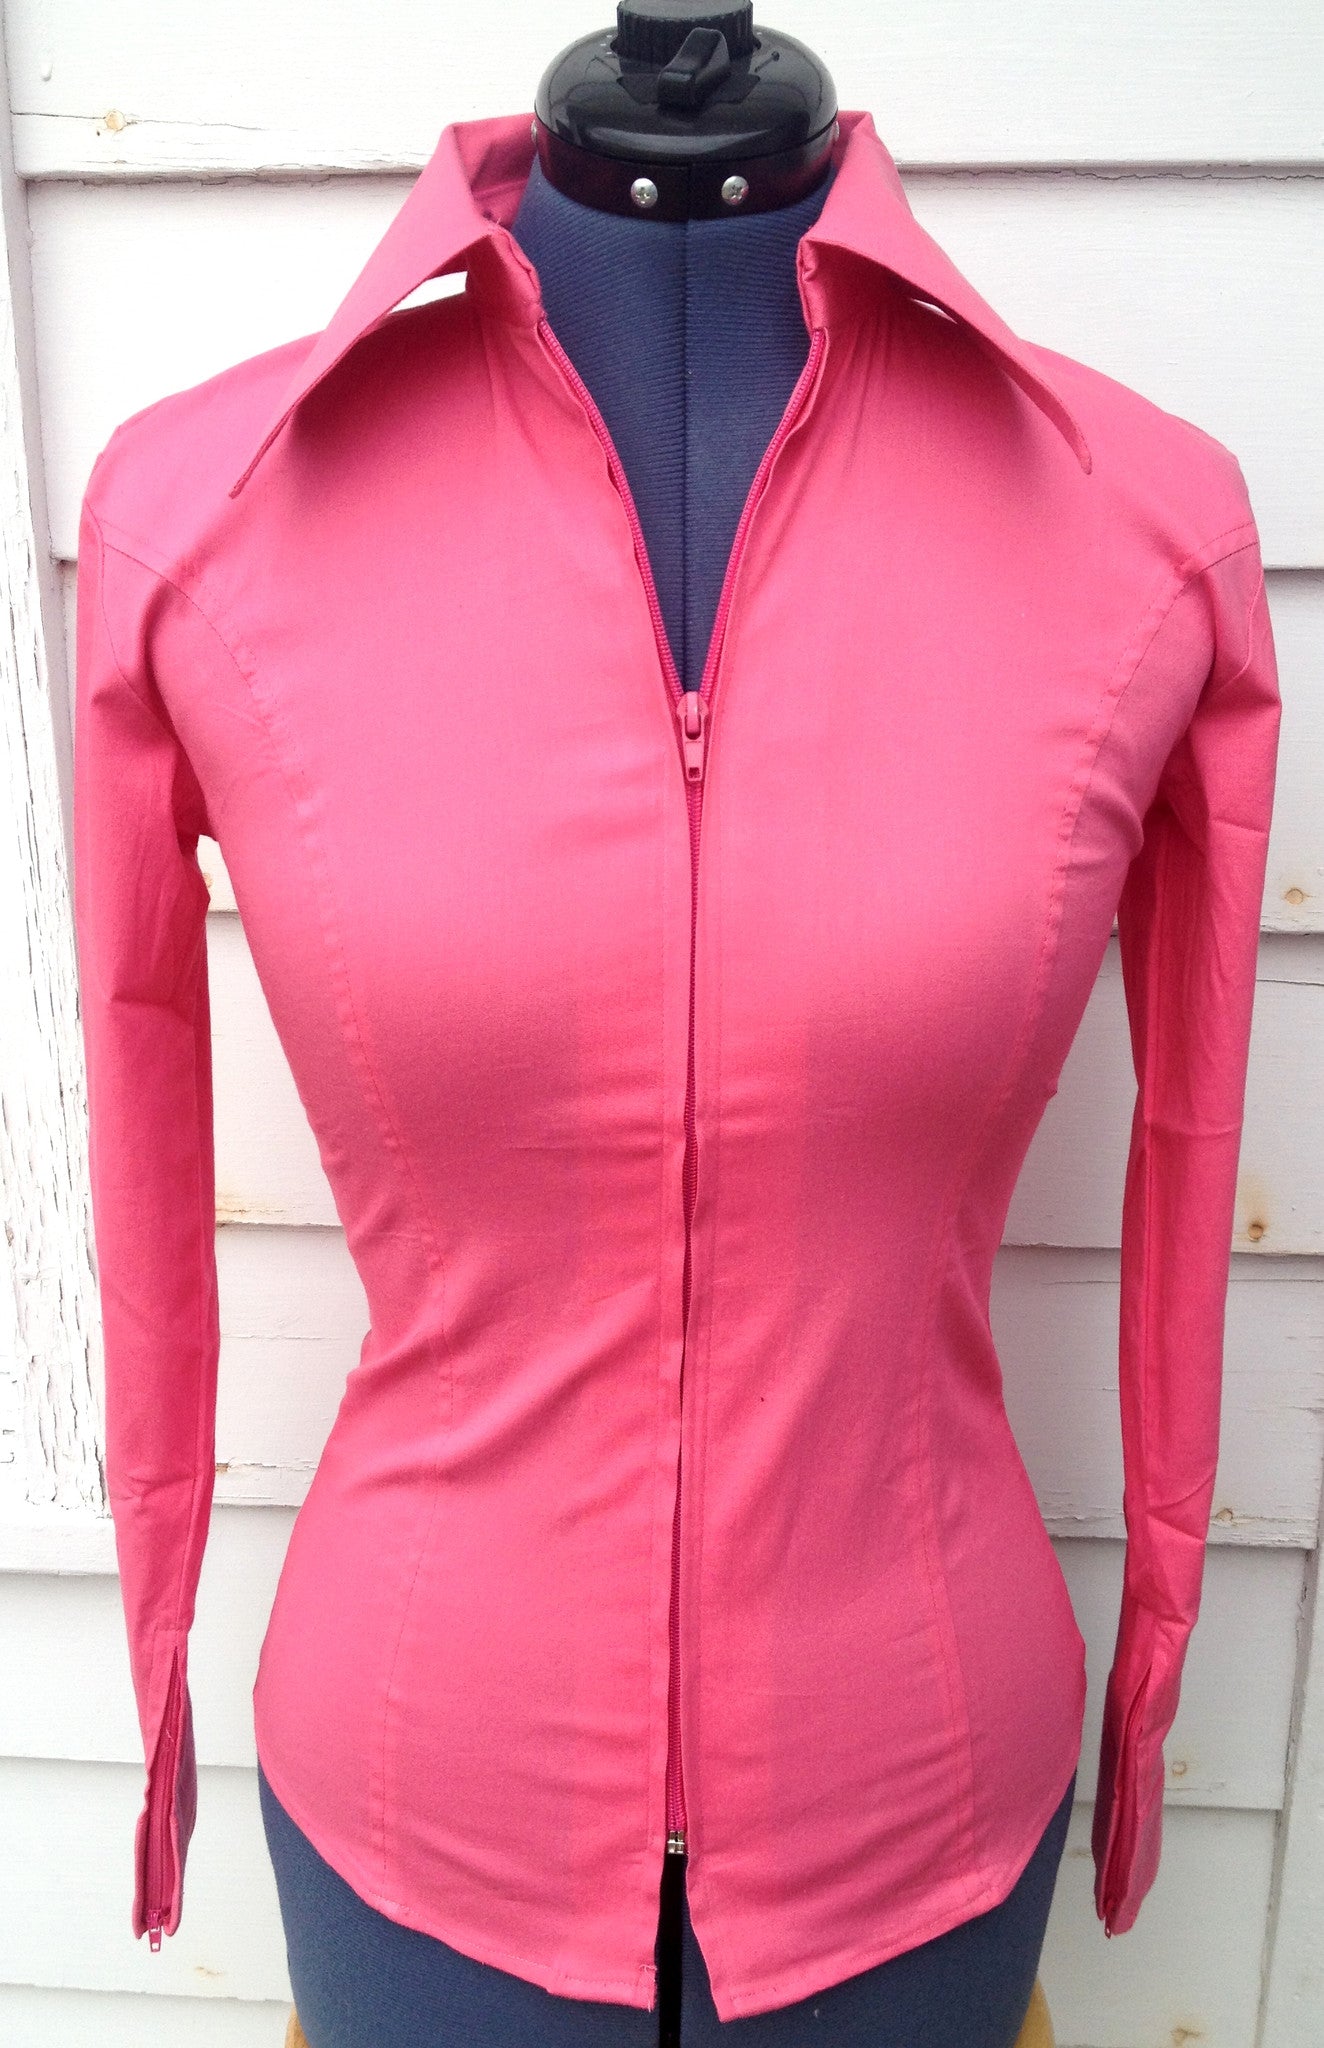 Ladies Zip Up Fitted Show Shirt - Coral